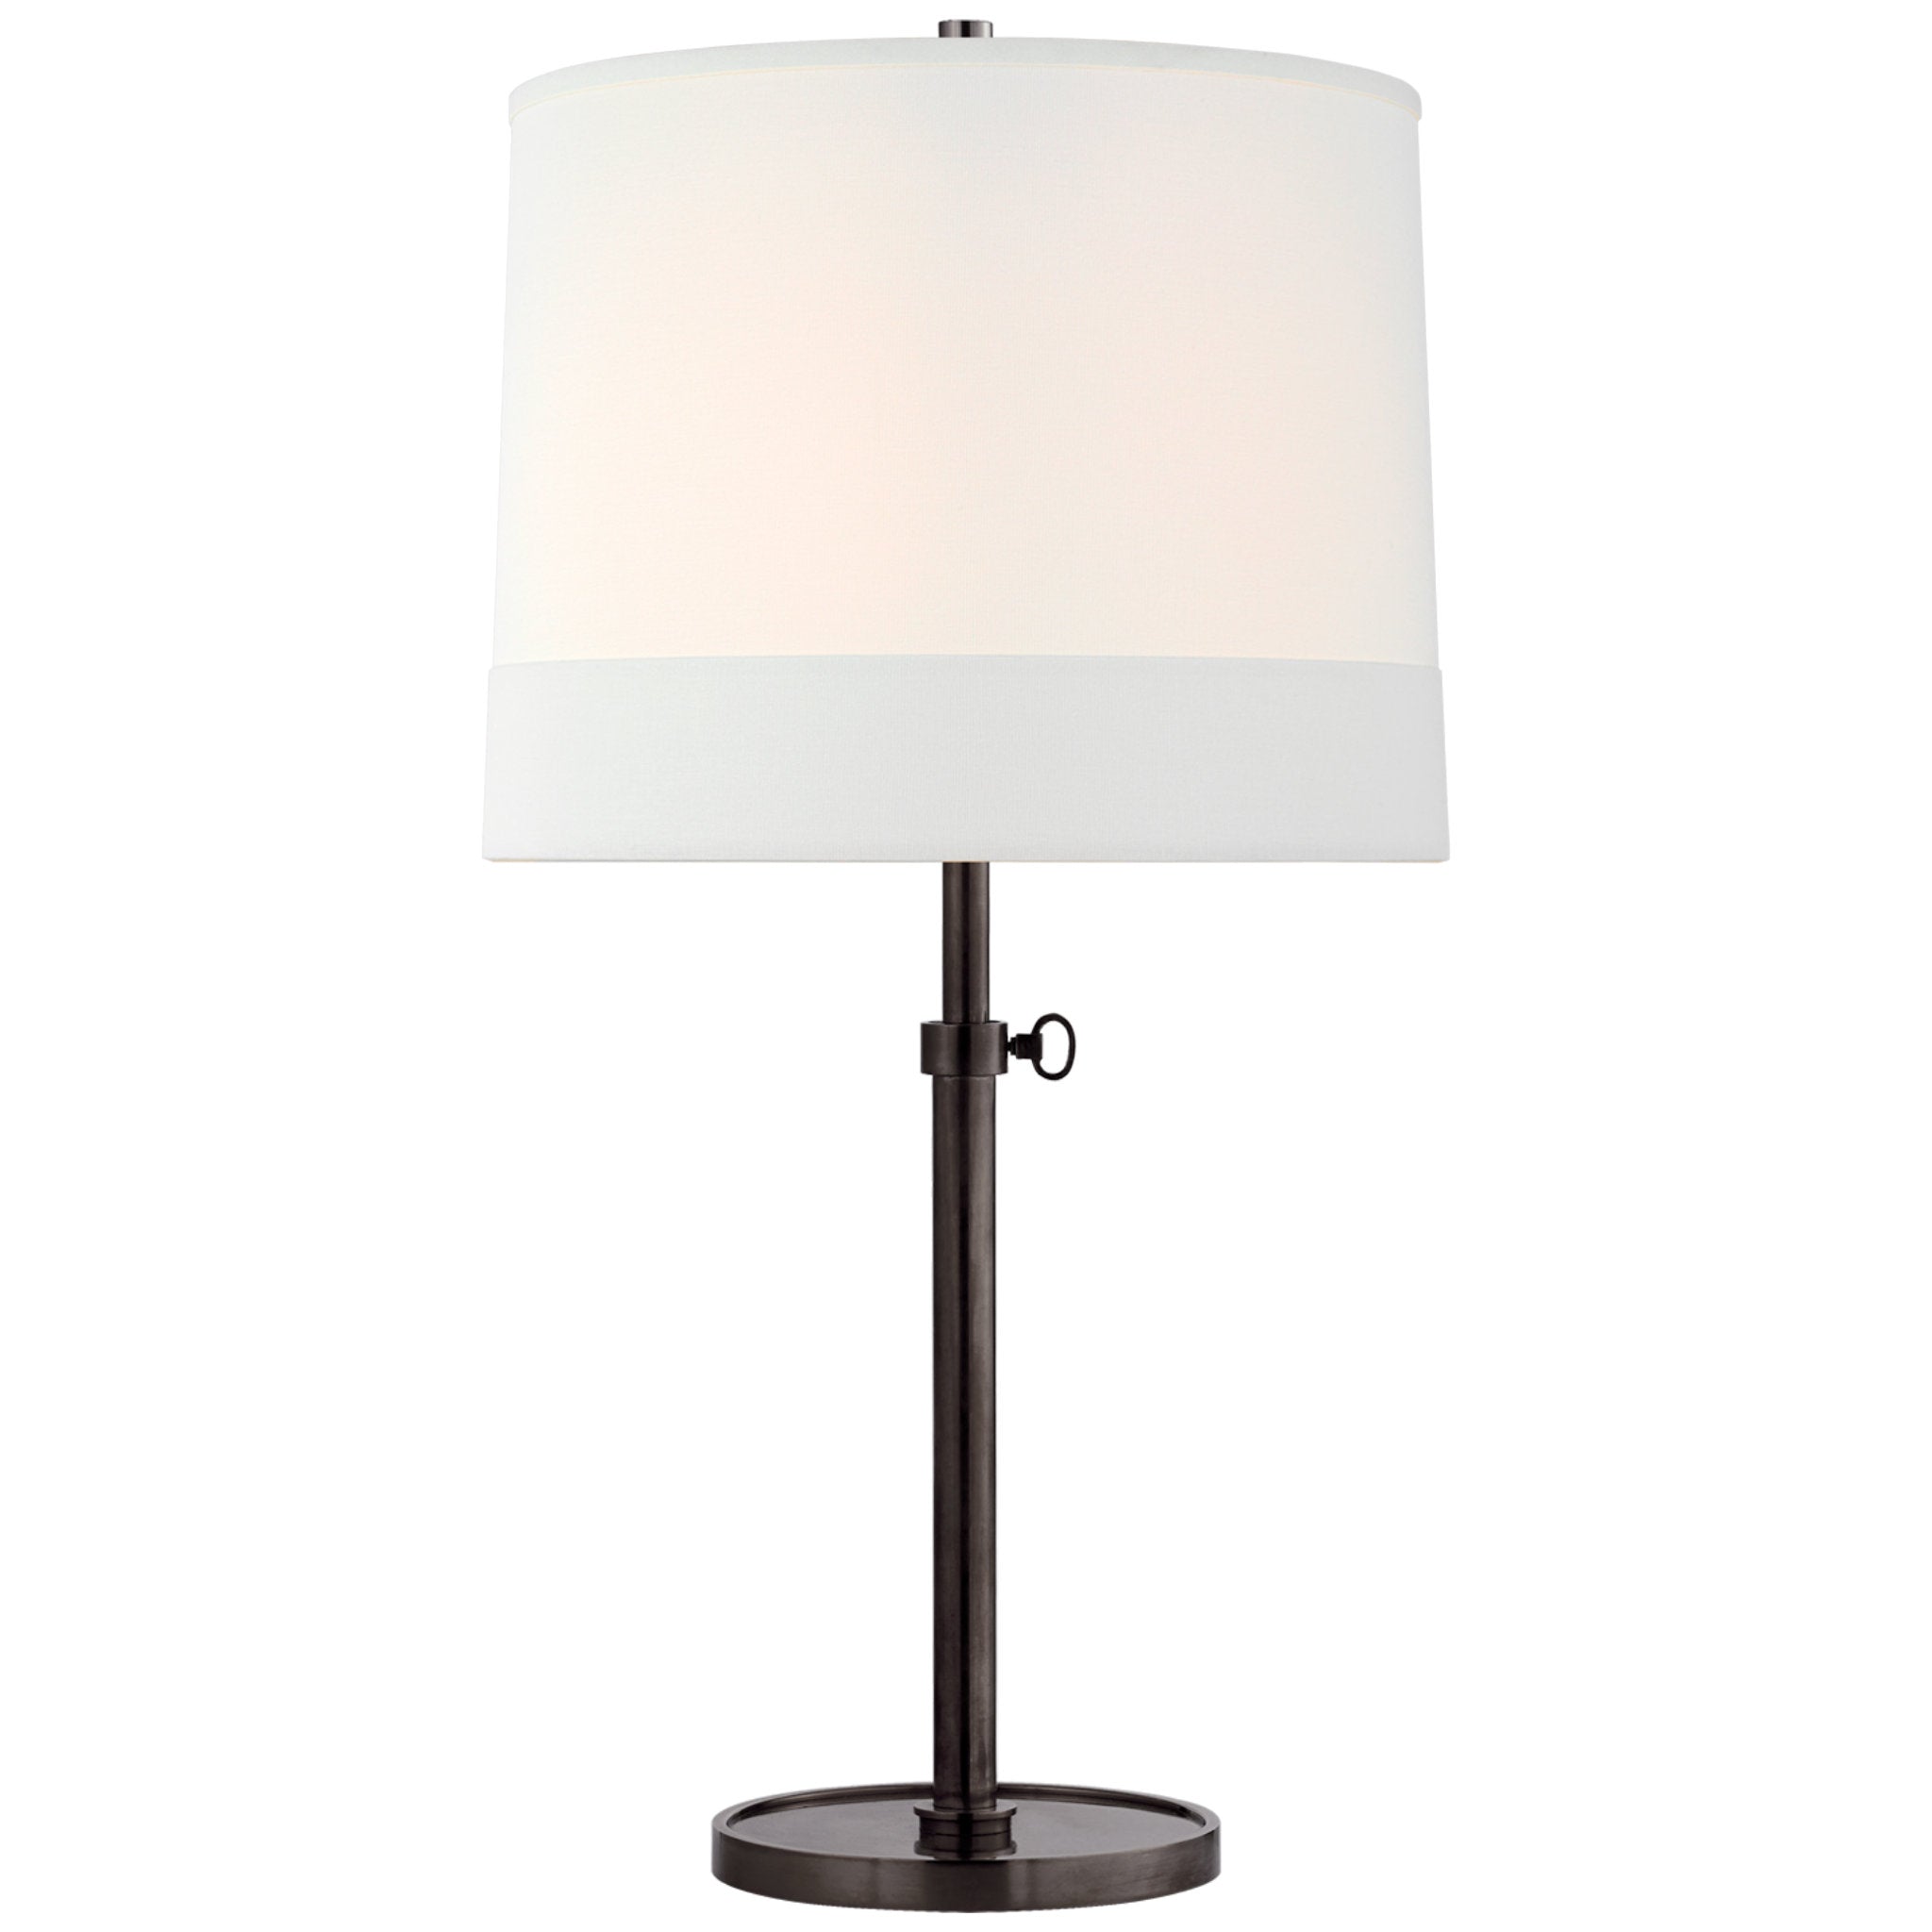 Barbara Barry Simple Adjustable Table Lamp in Bronze with Banded Linen Shade